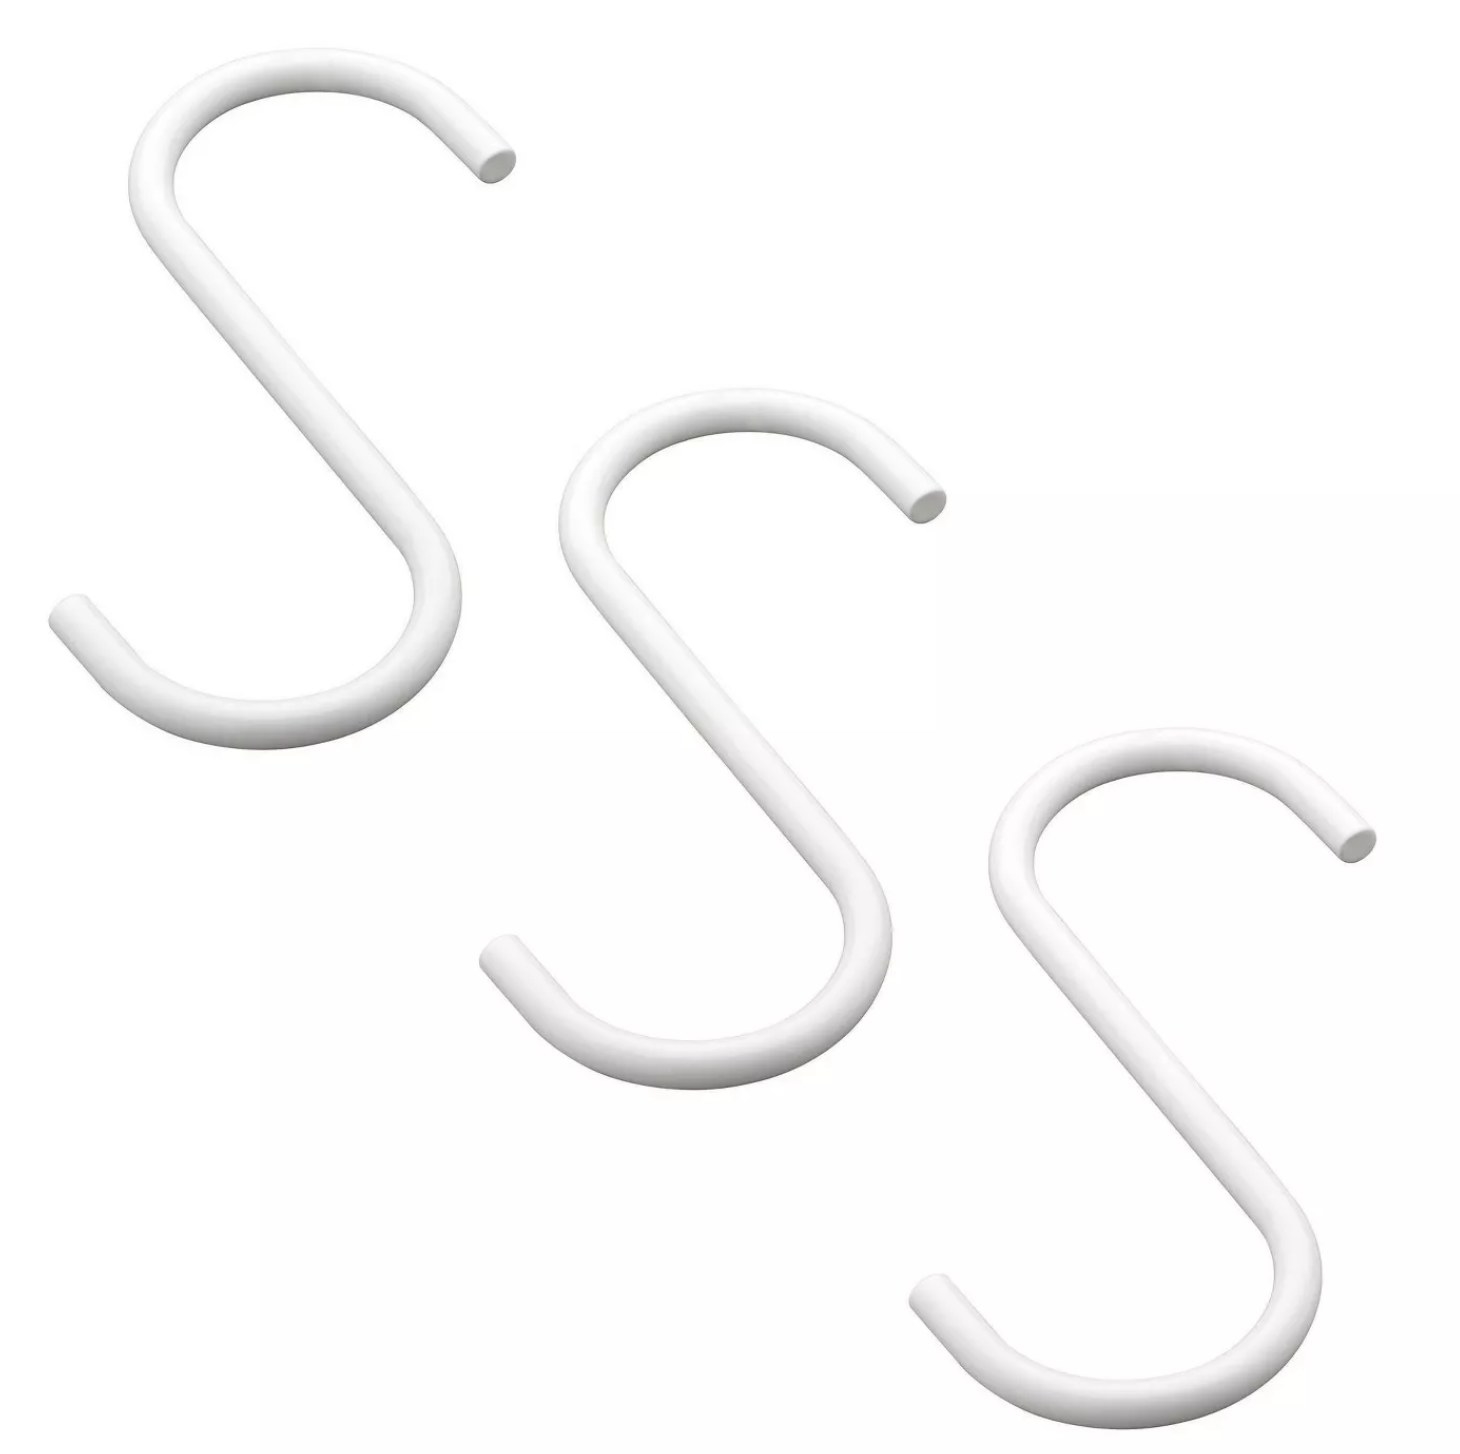 A set of three white s-hooks against a white background.